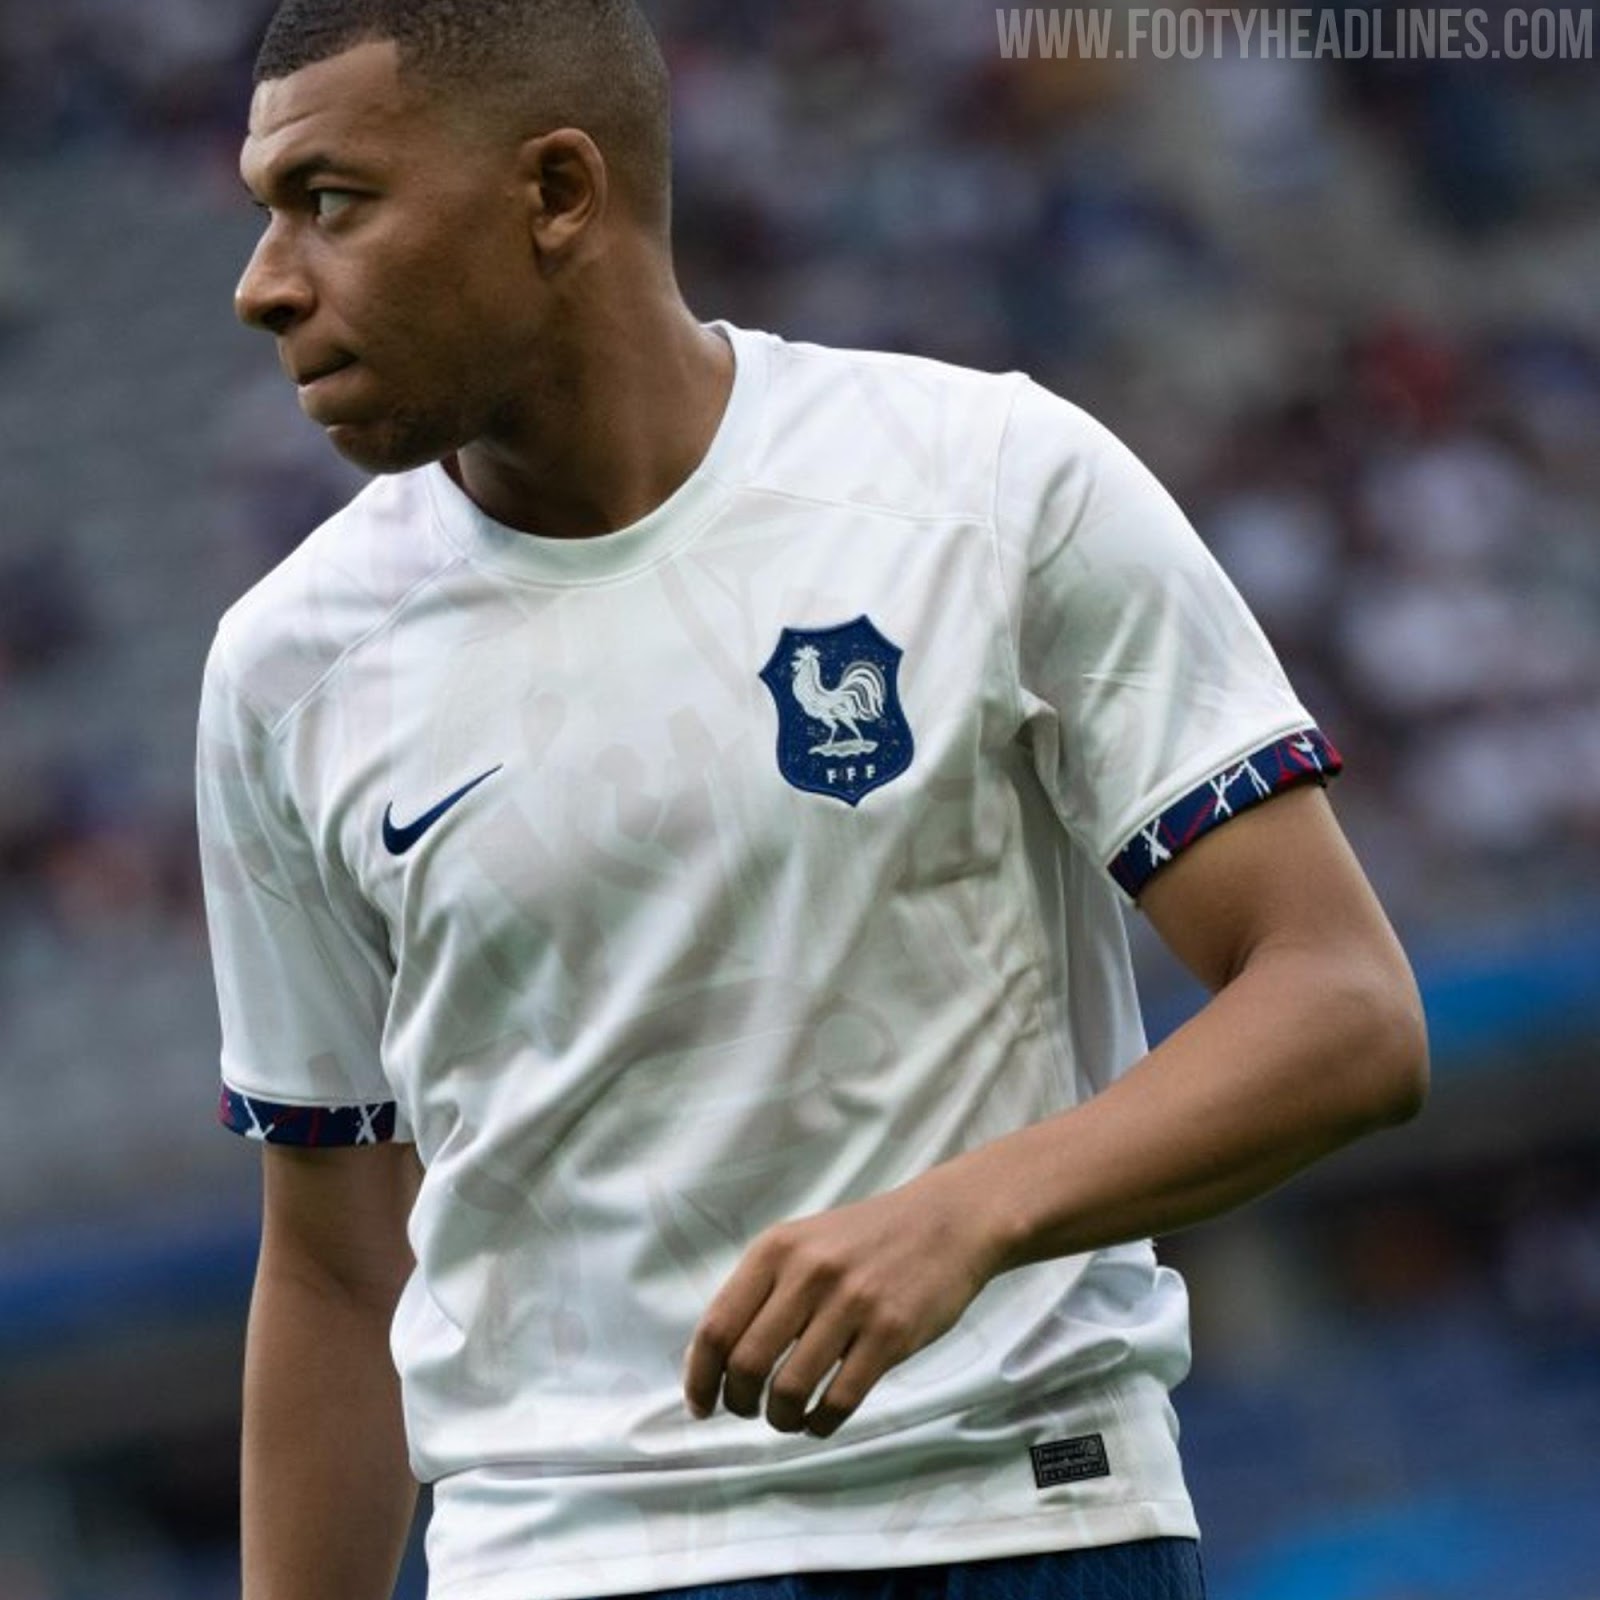 Football League 2023 - How to change kits and players' pictures. 